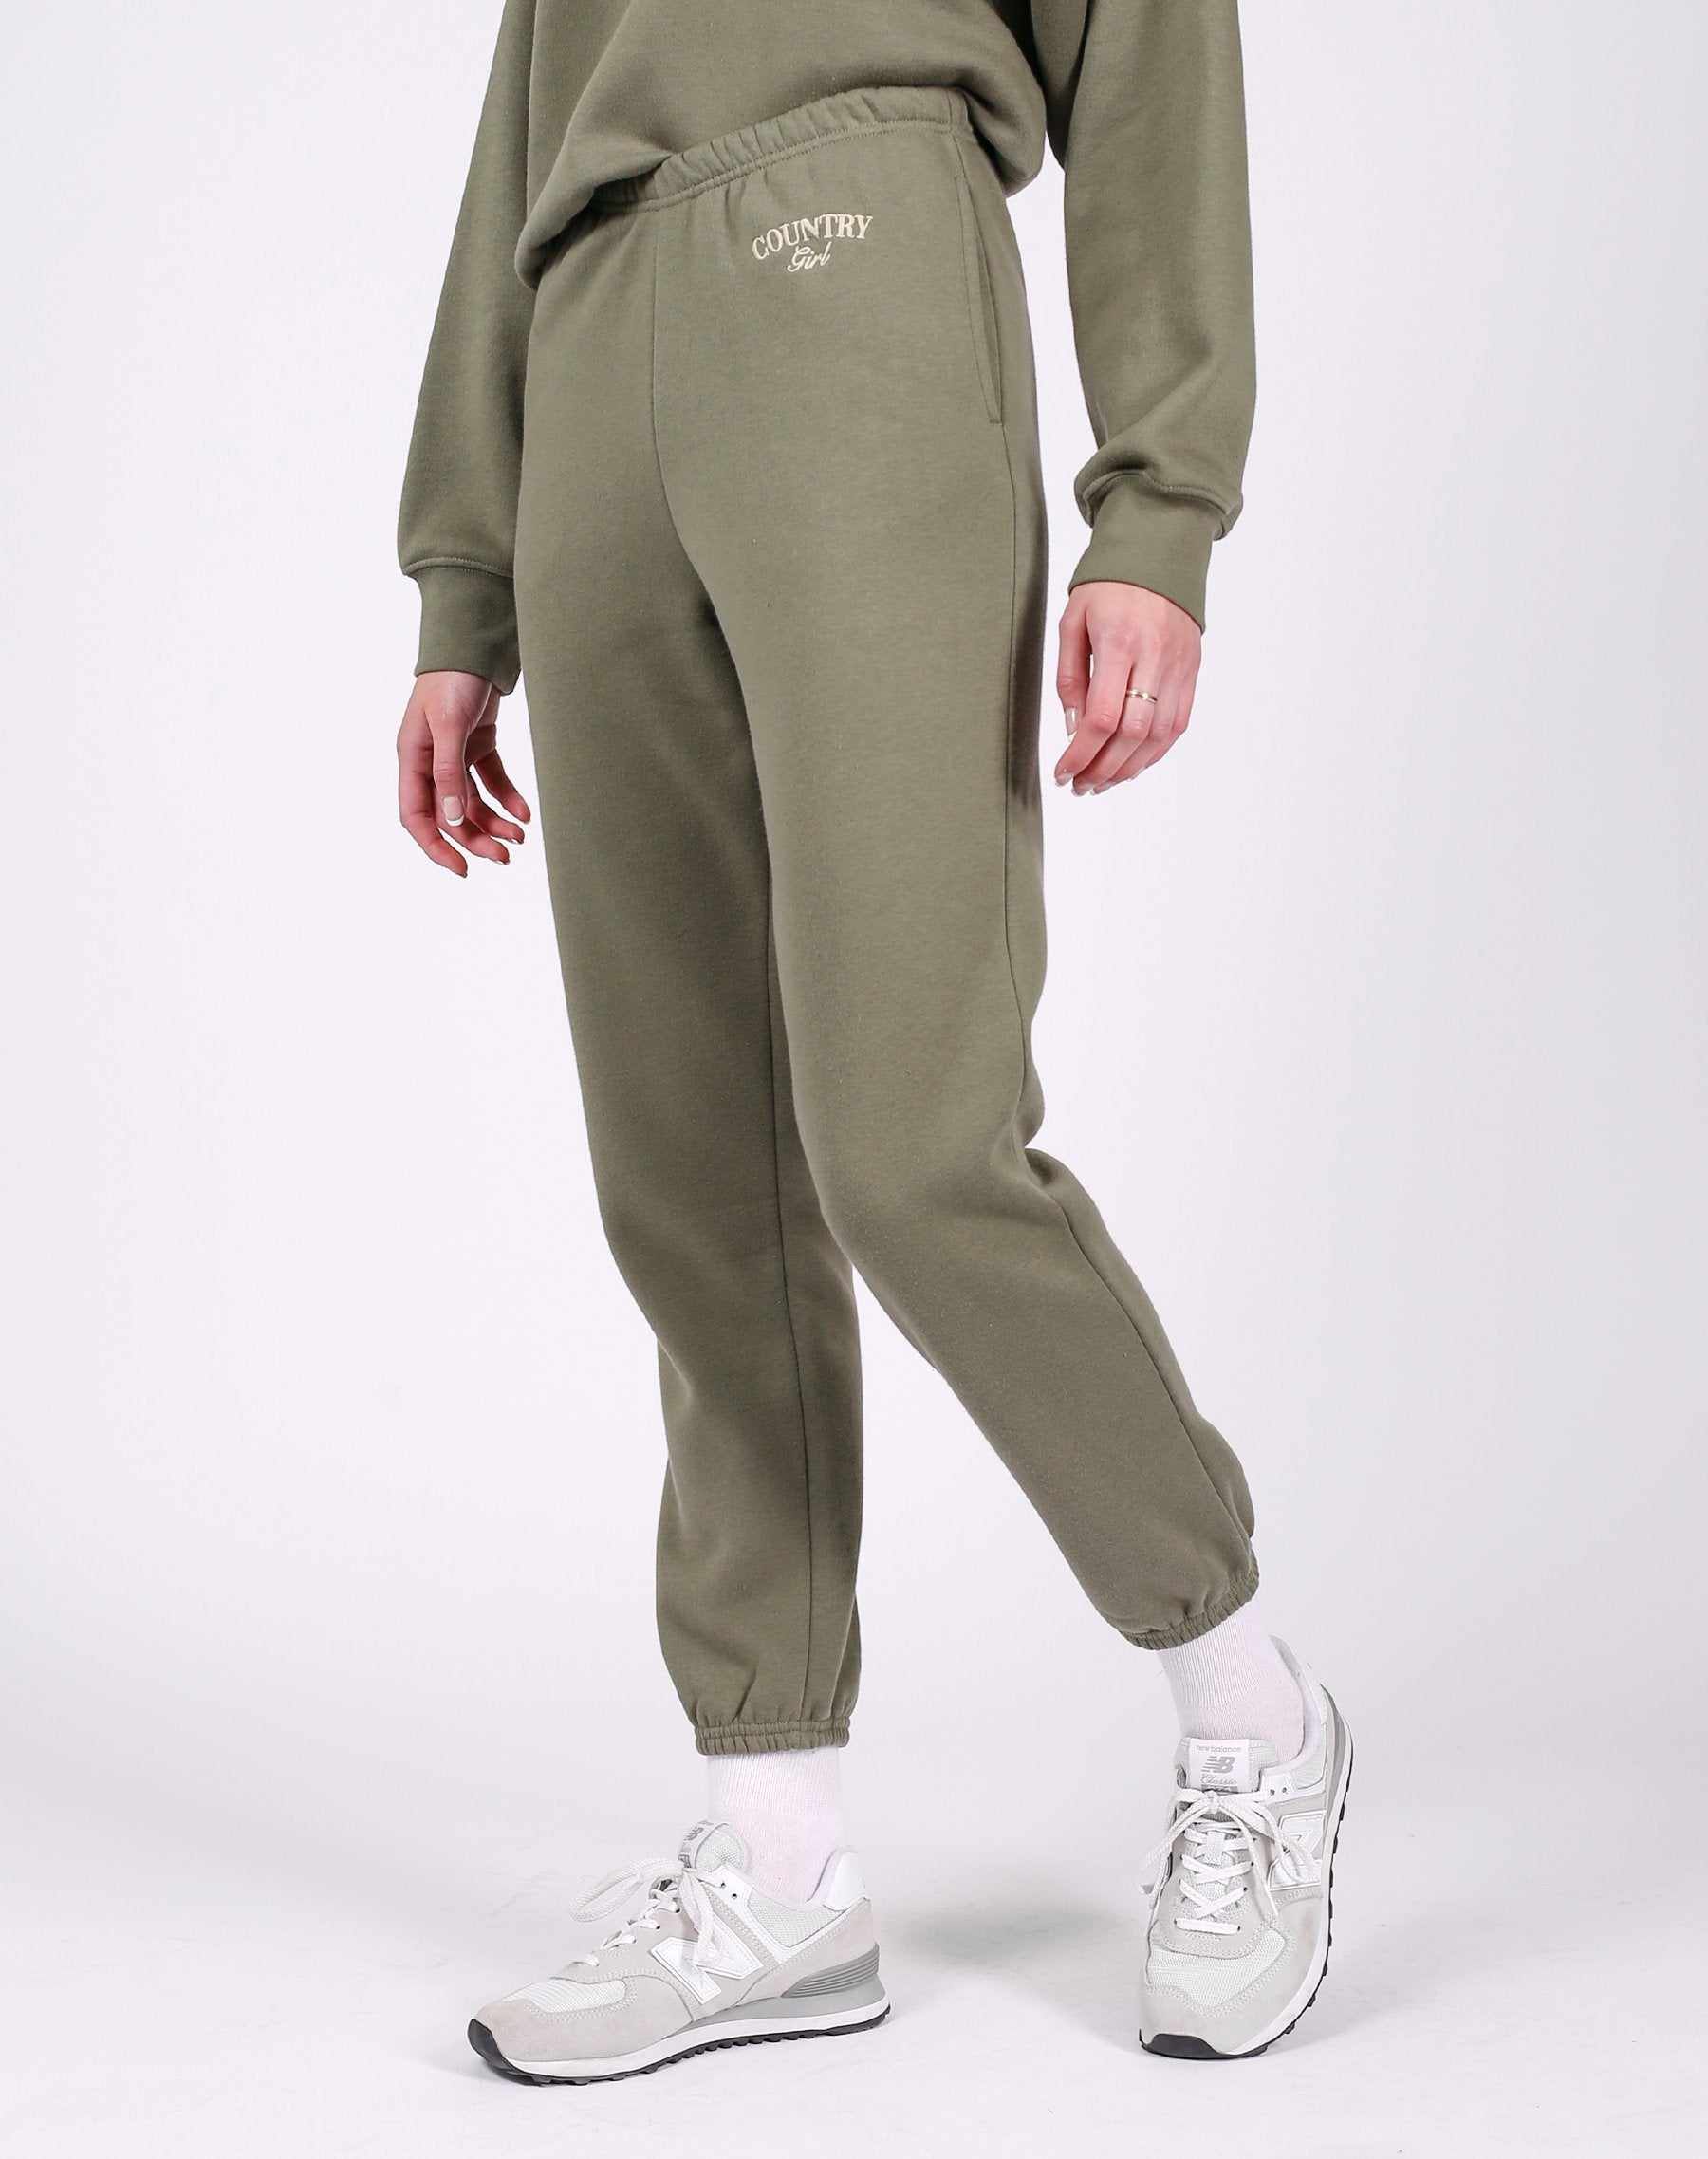 The "COUNTRY GIRL" Best Friend Joggers | Olive